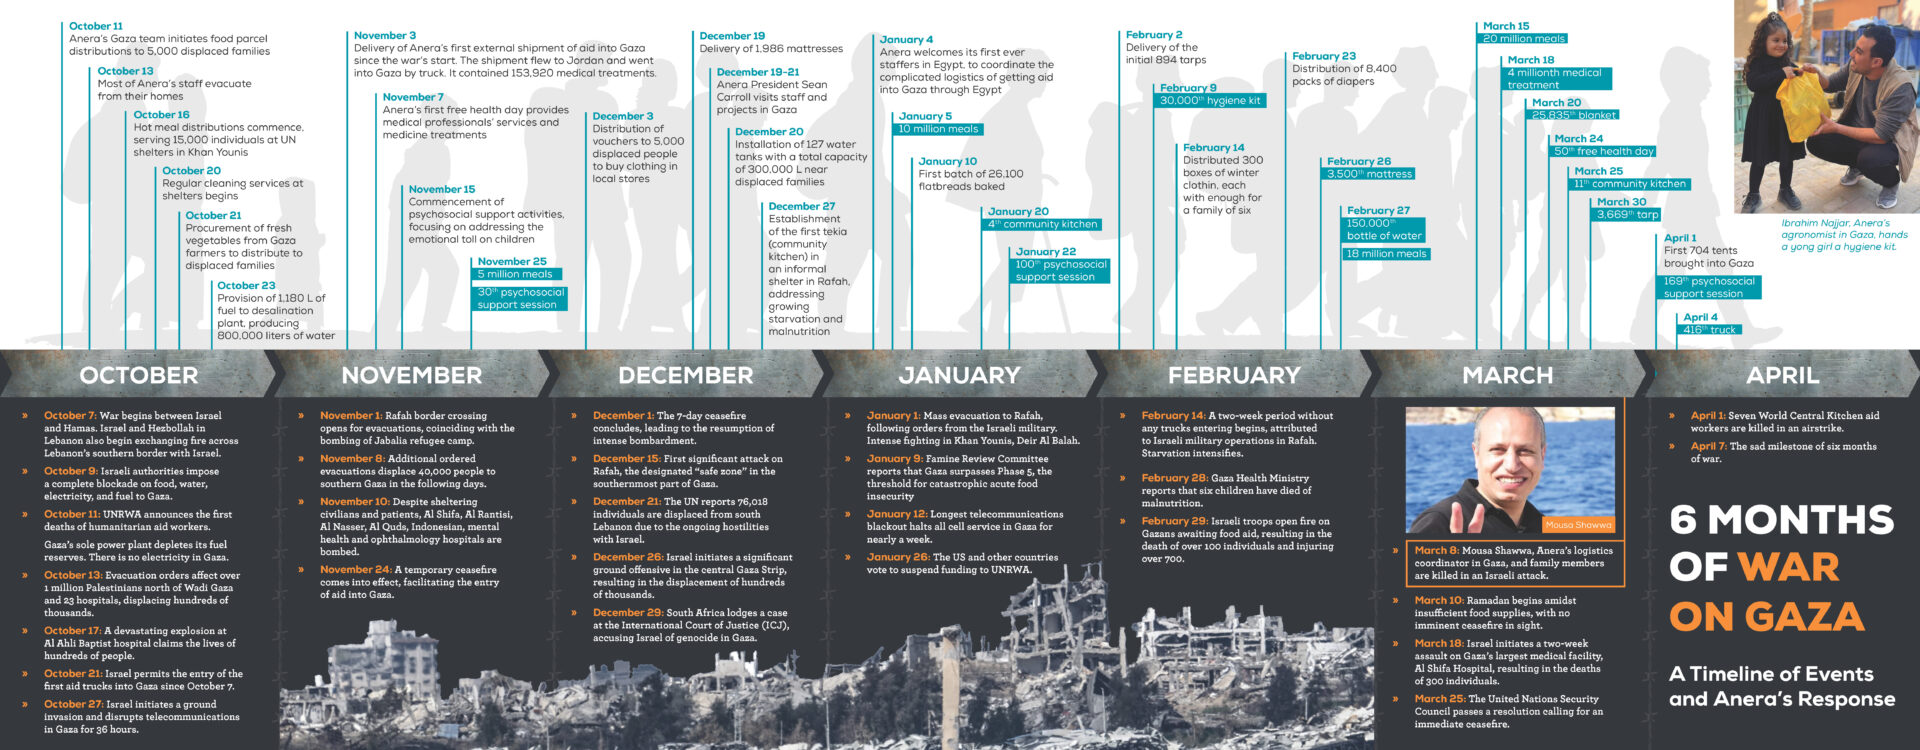 A comprehensive view of the timeline covering six months of war in Gaza.